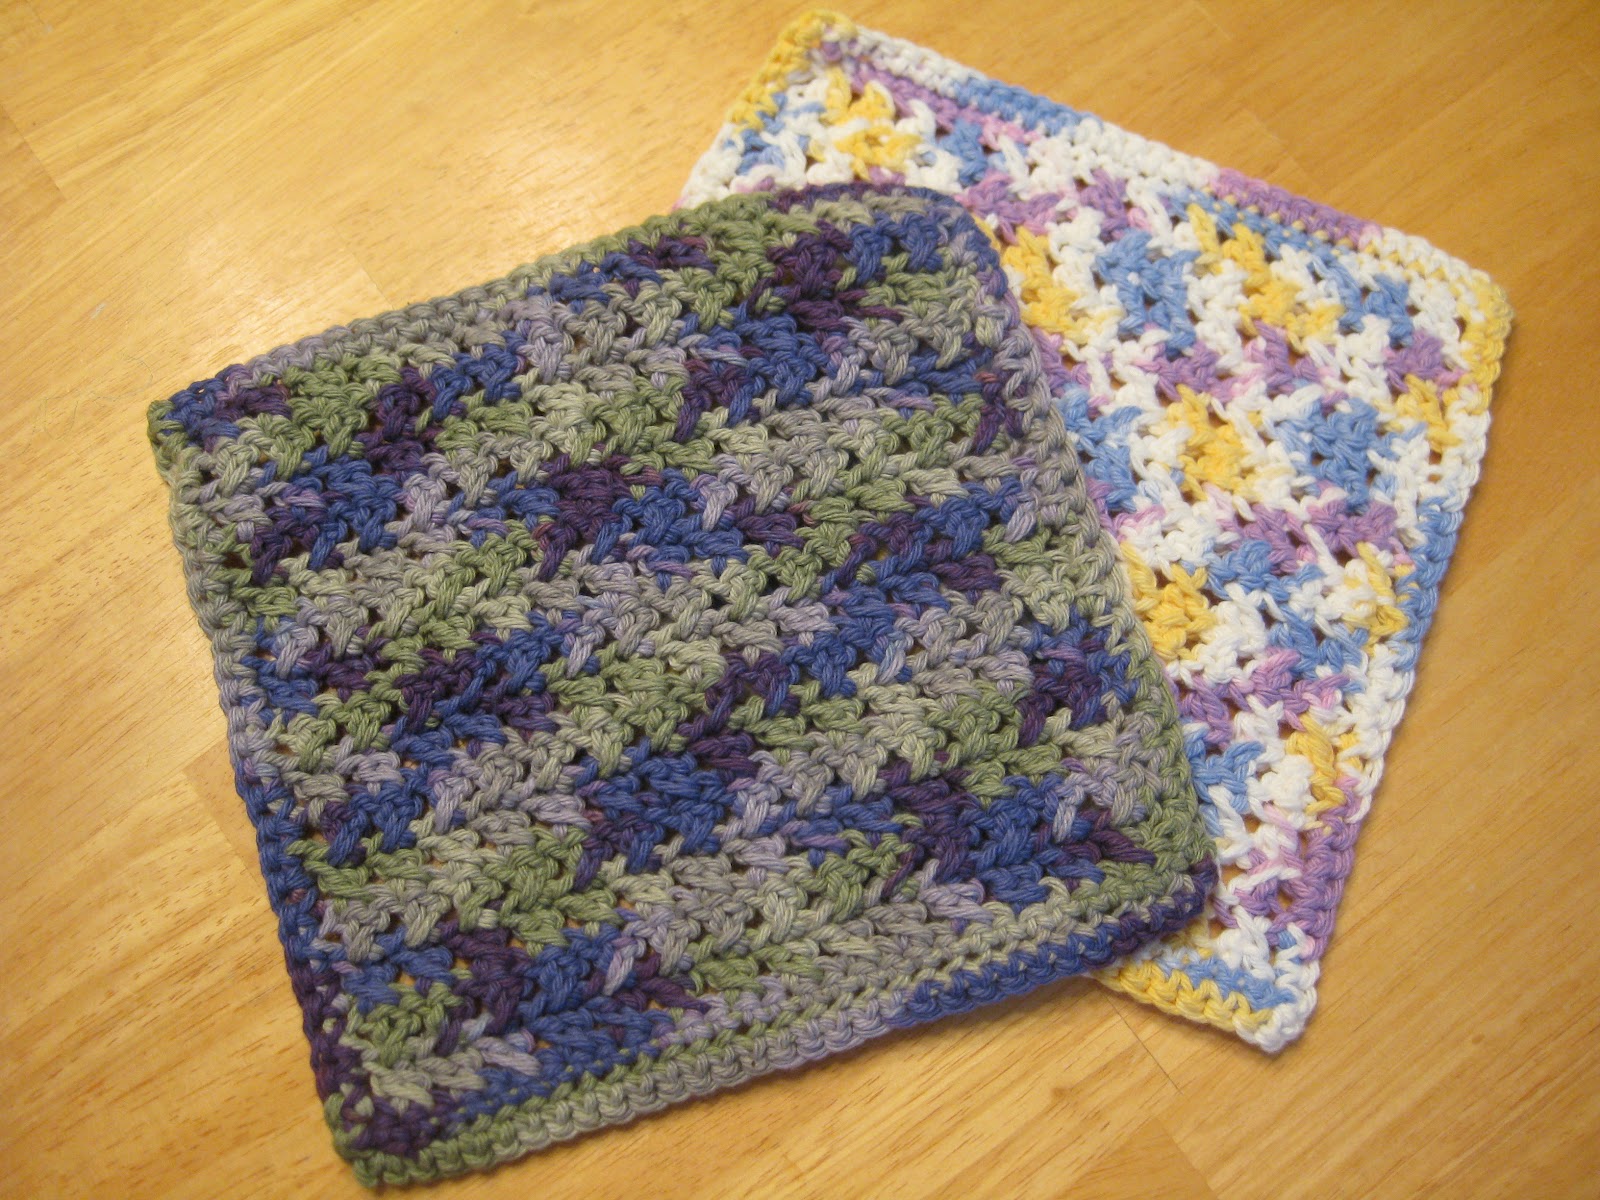 Easy Dishcloths to Crochet: Three Free Crochet Patterns for Simple